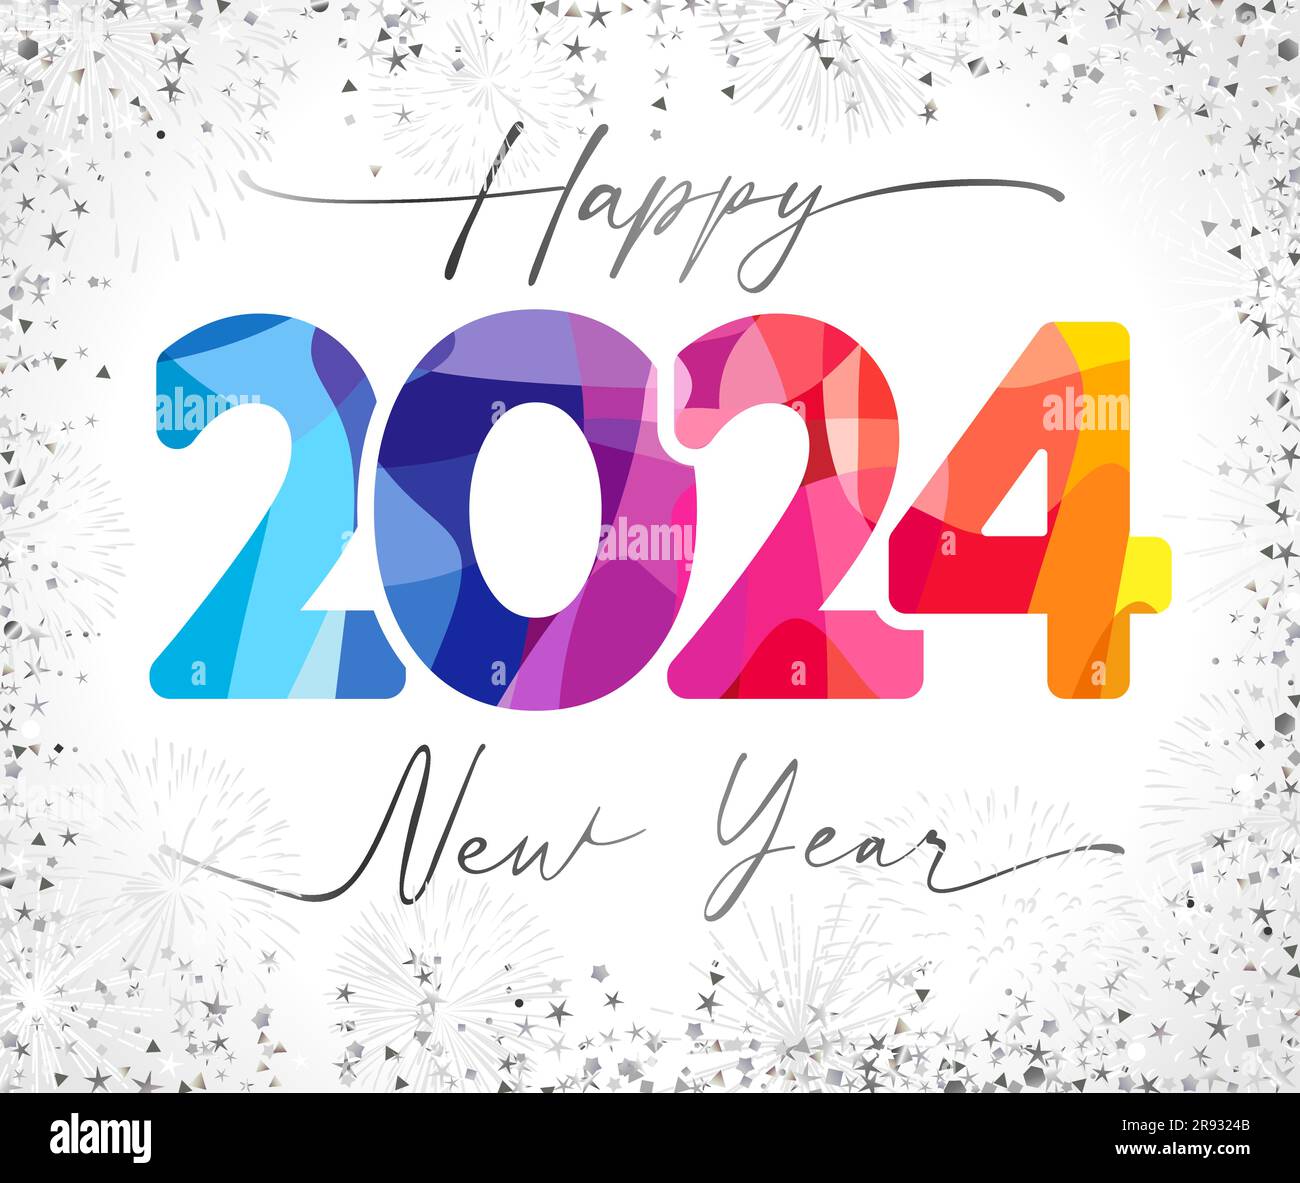 https://c8.alamy.com/comp/2R9324B/2024-a-happy-new-year-bright-greetings-holiday-black-and-white-background-modern-calligraphic-text-isolated-colorful-number-20-24-fireworks-2R9324B.jpg